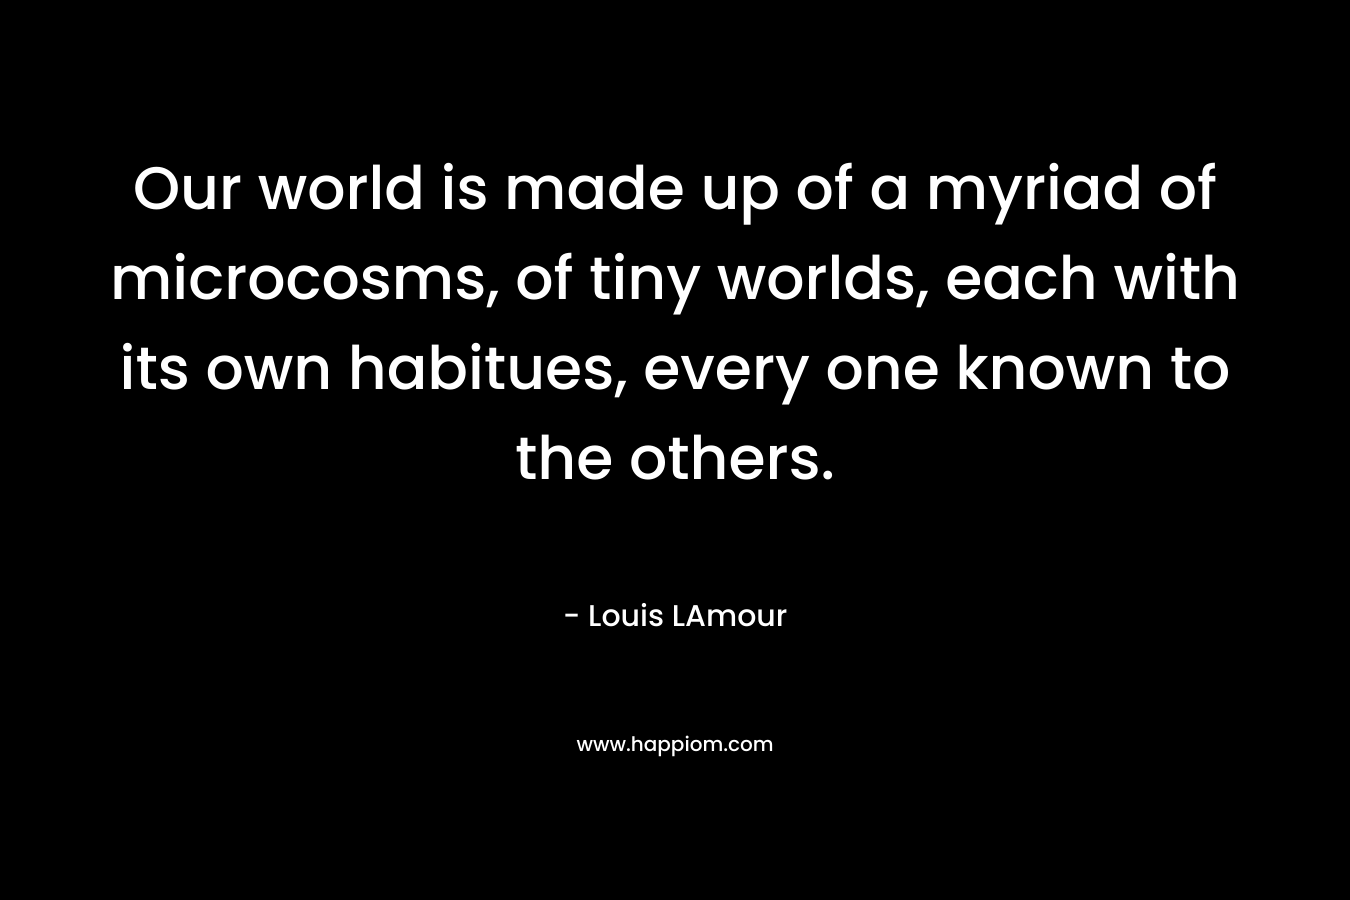 Our world is made up of a myriad of microcosms, of tiny worlds, each with its own habitues, every one known to the others. – Louis LAmour